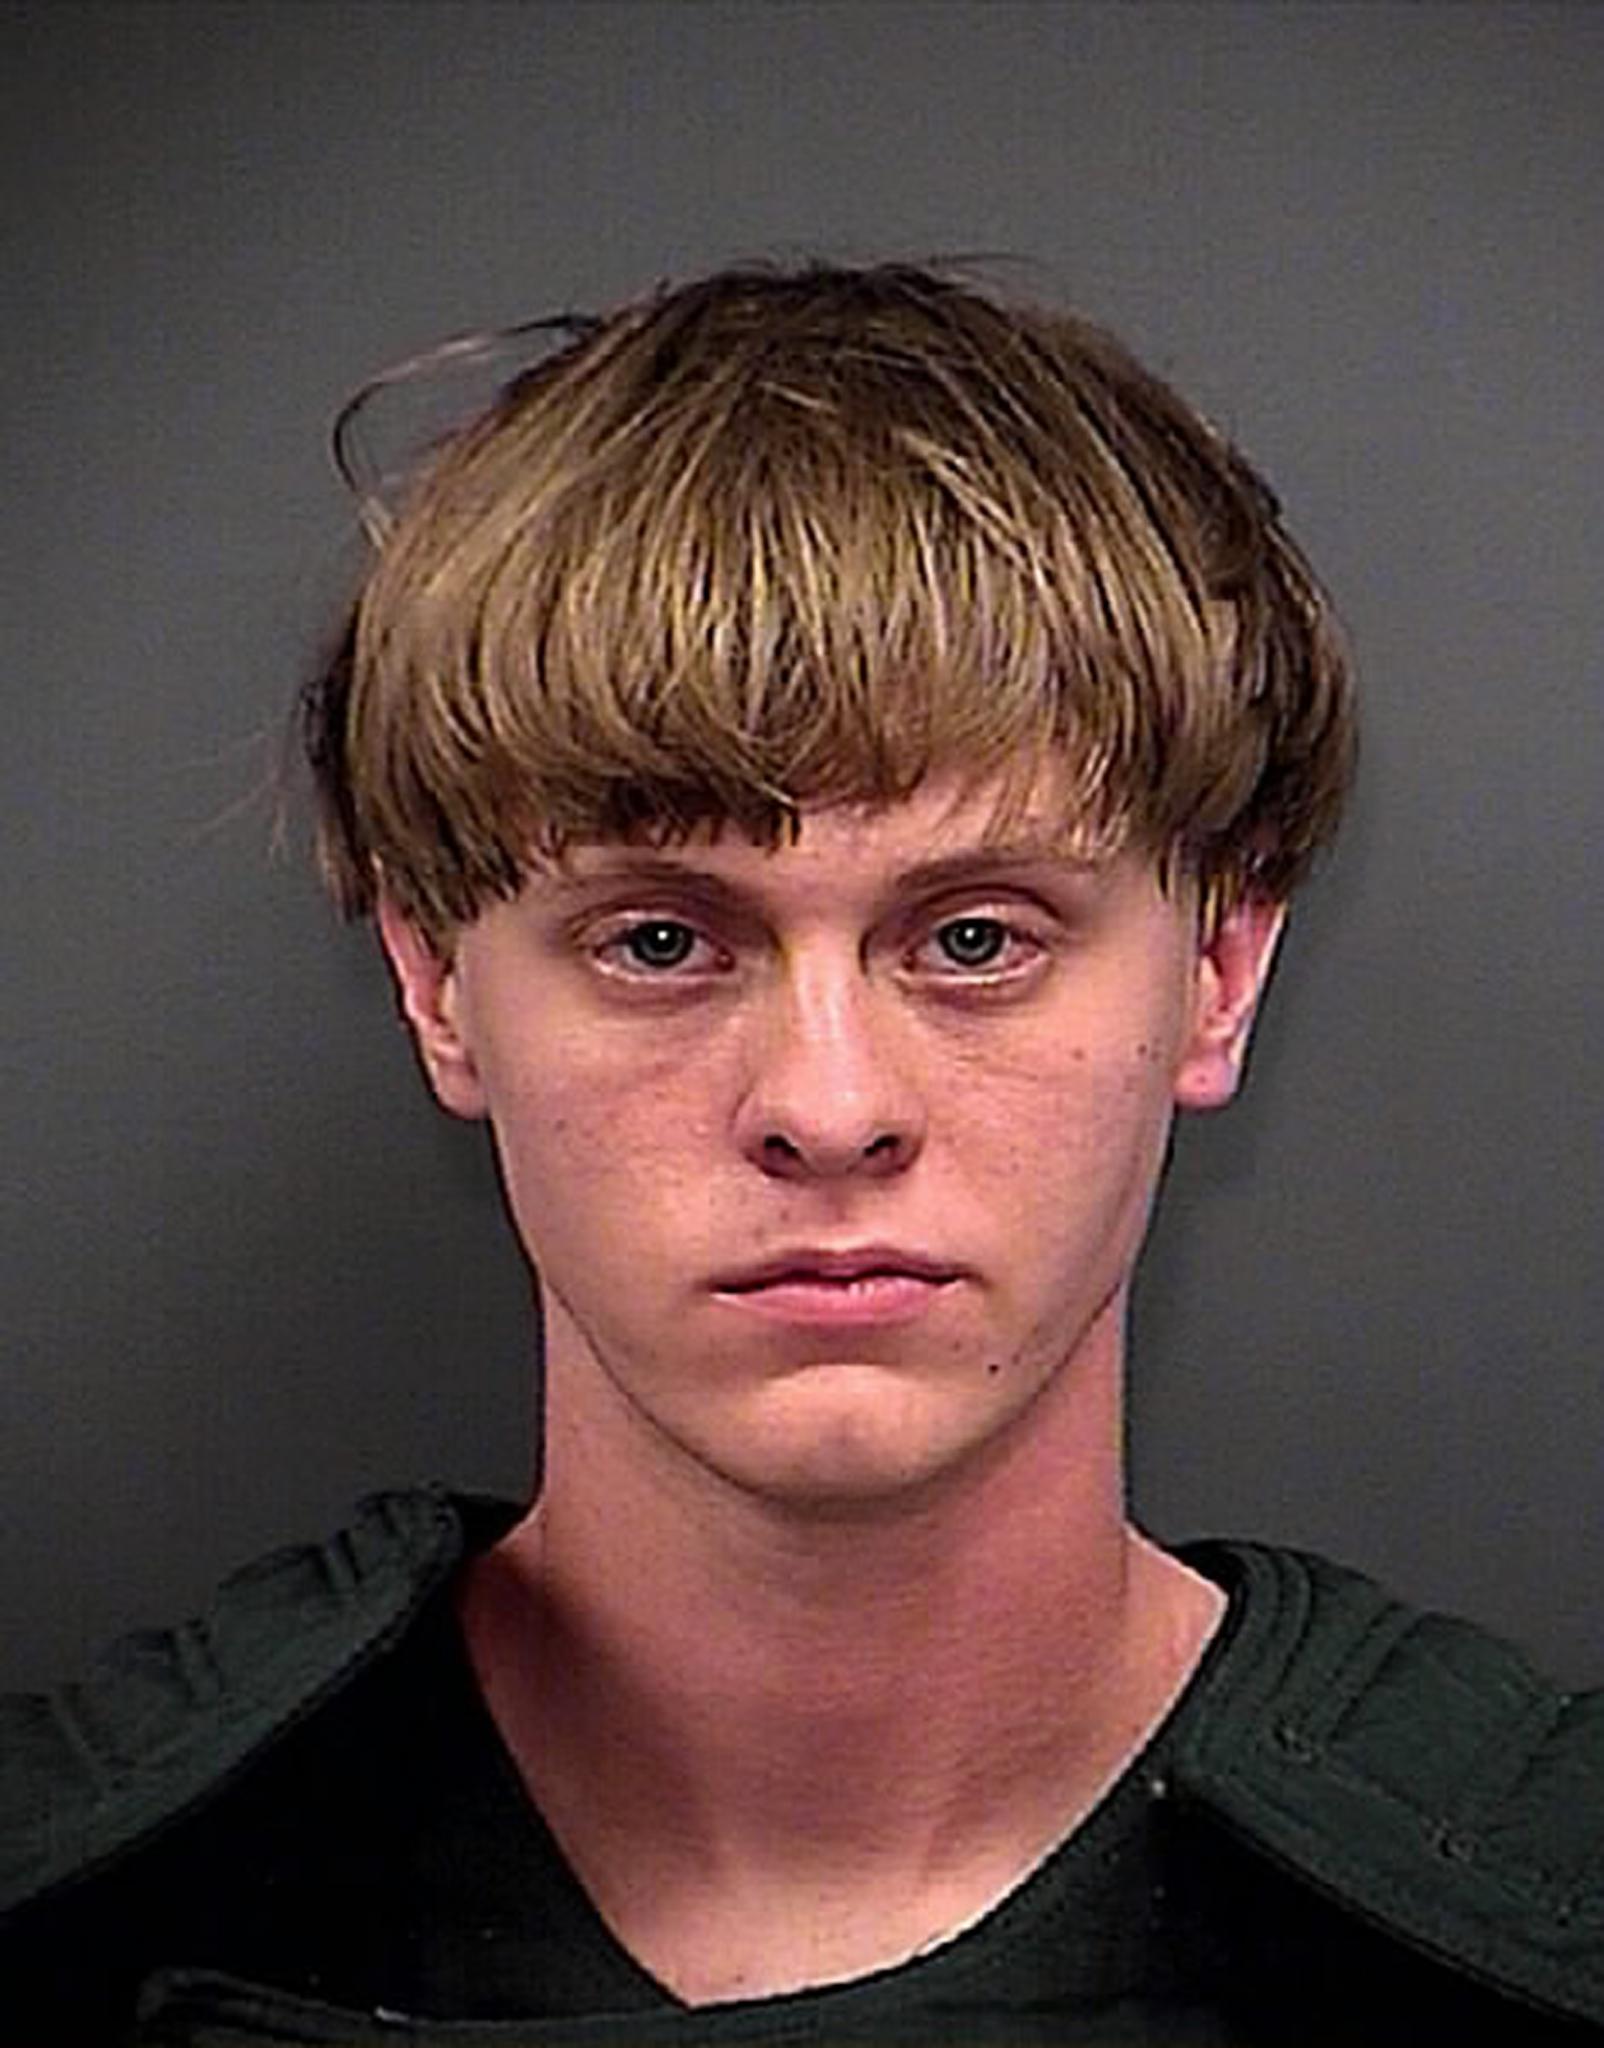 Justice Department Seeking Death Penalty for Dylann Roof
